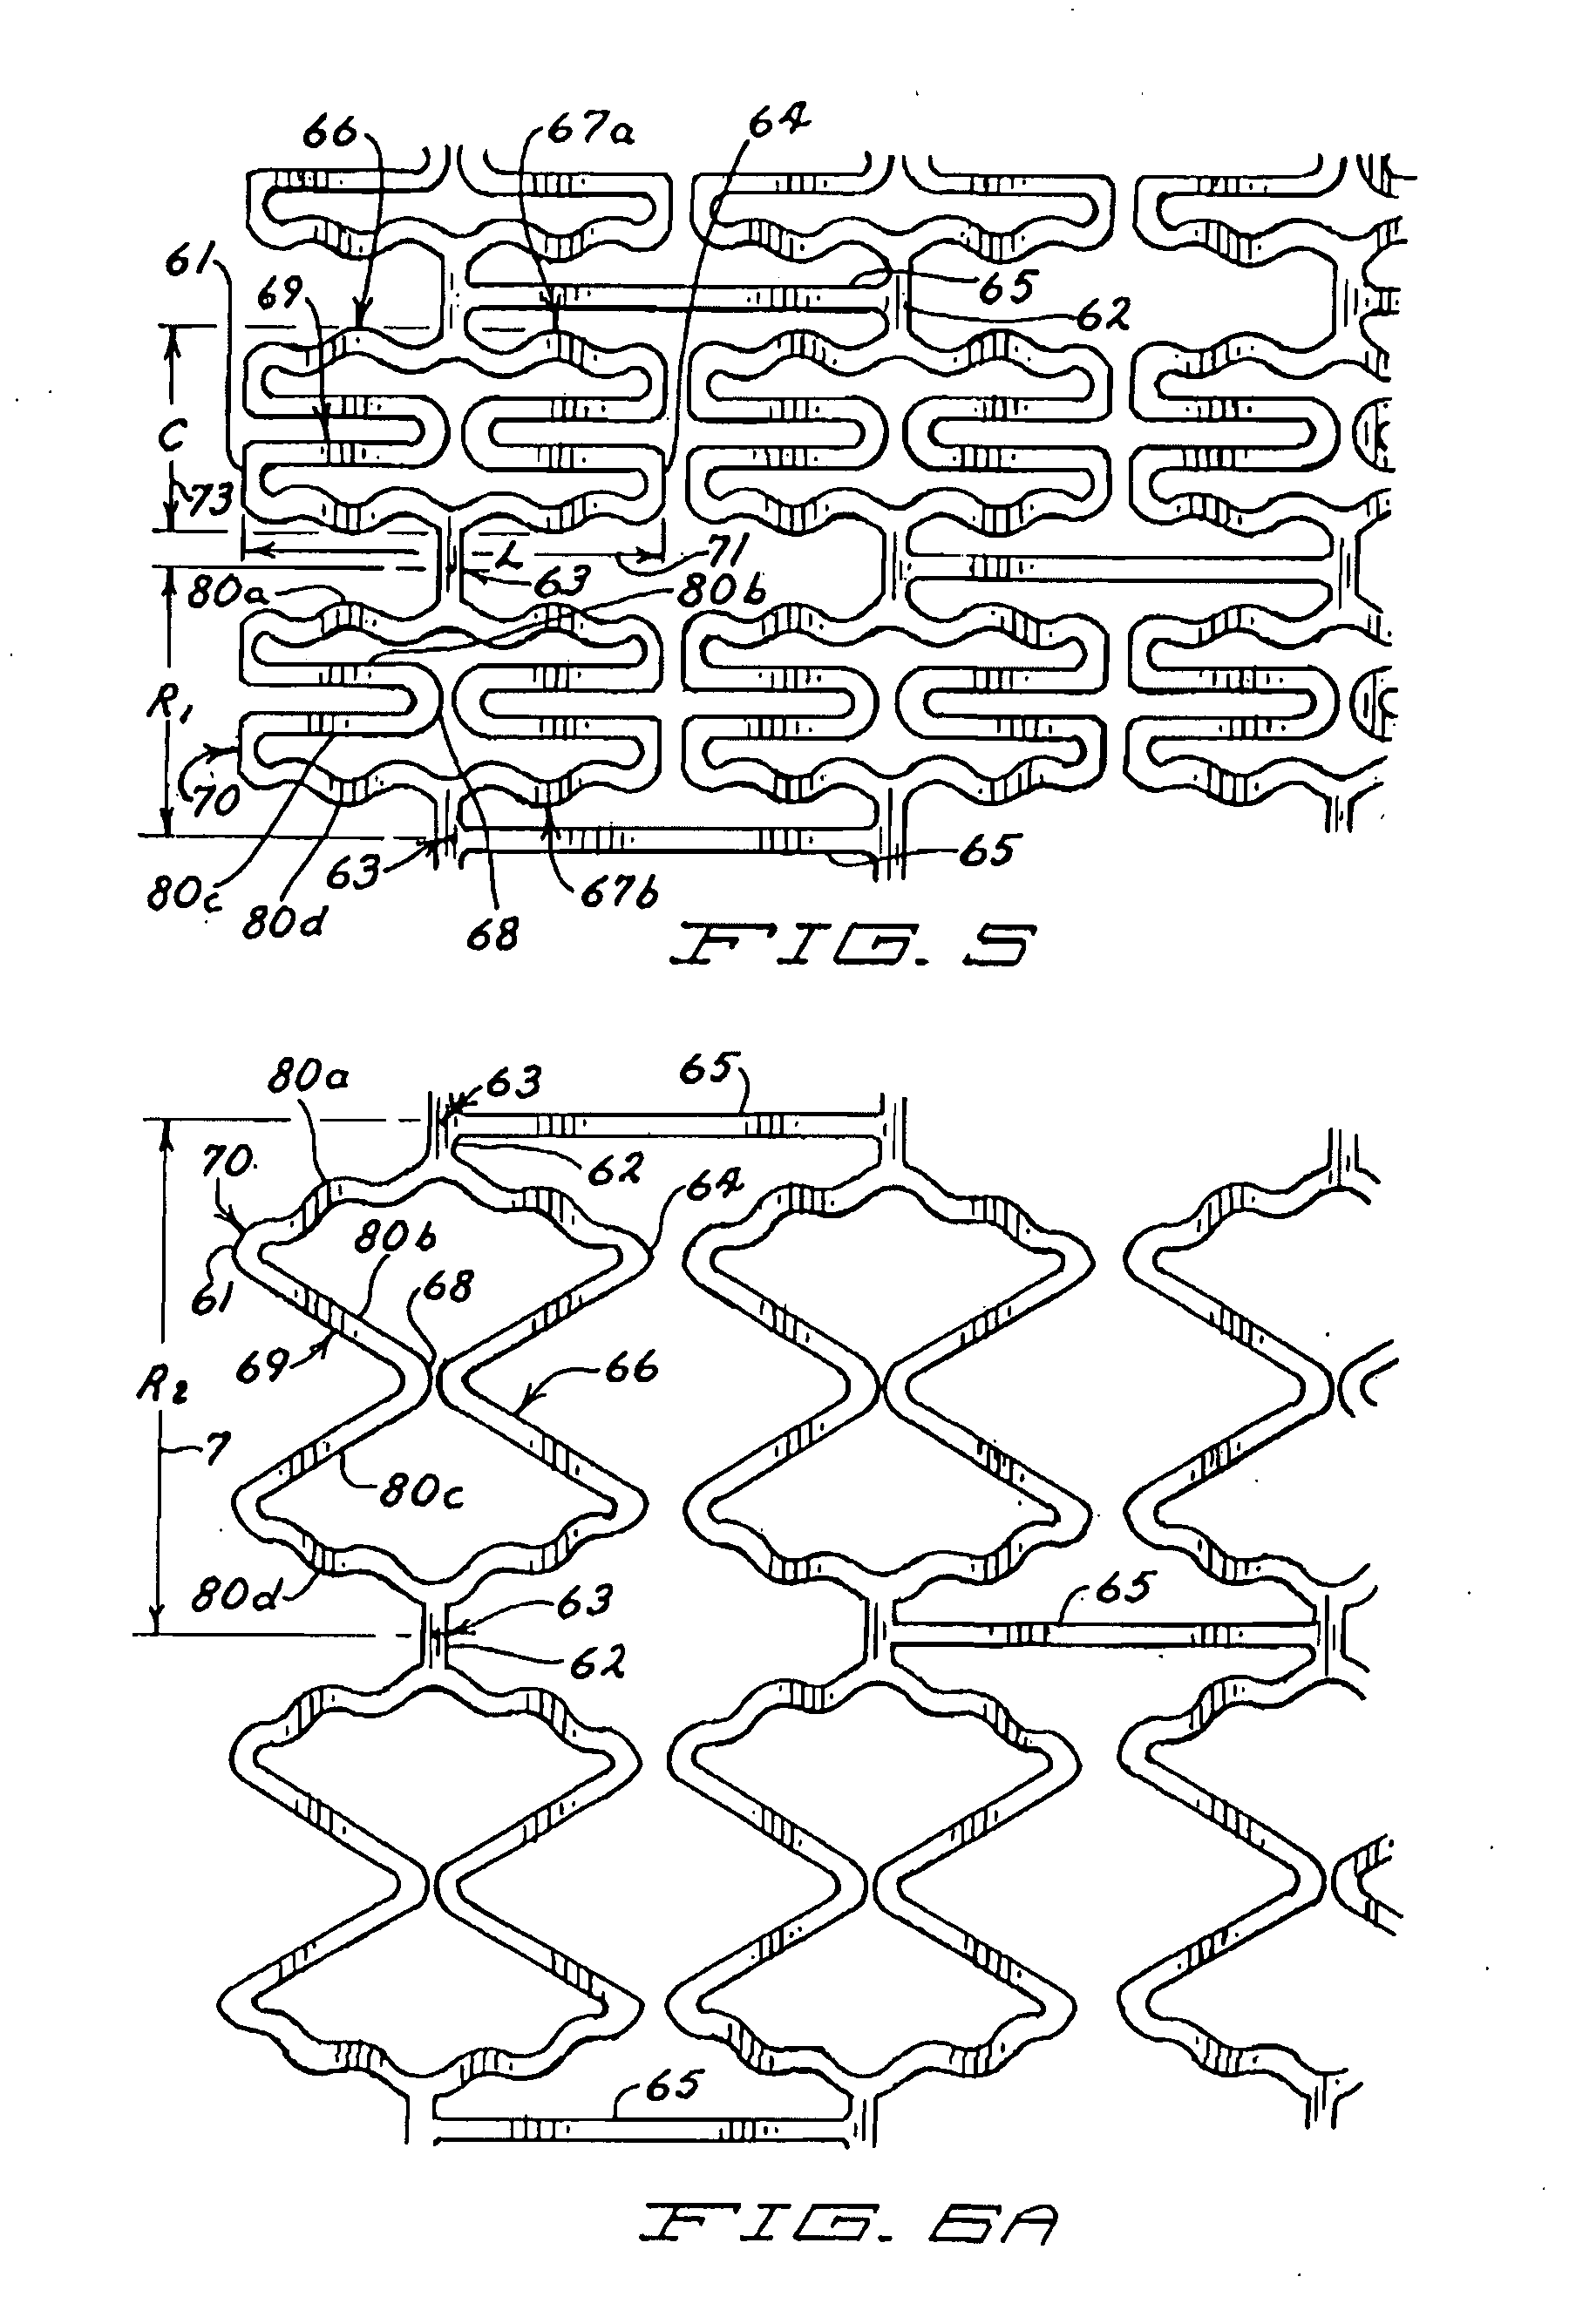 Expandable stent having a plurality of interconnected expansion modules